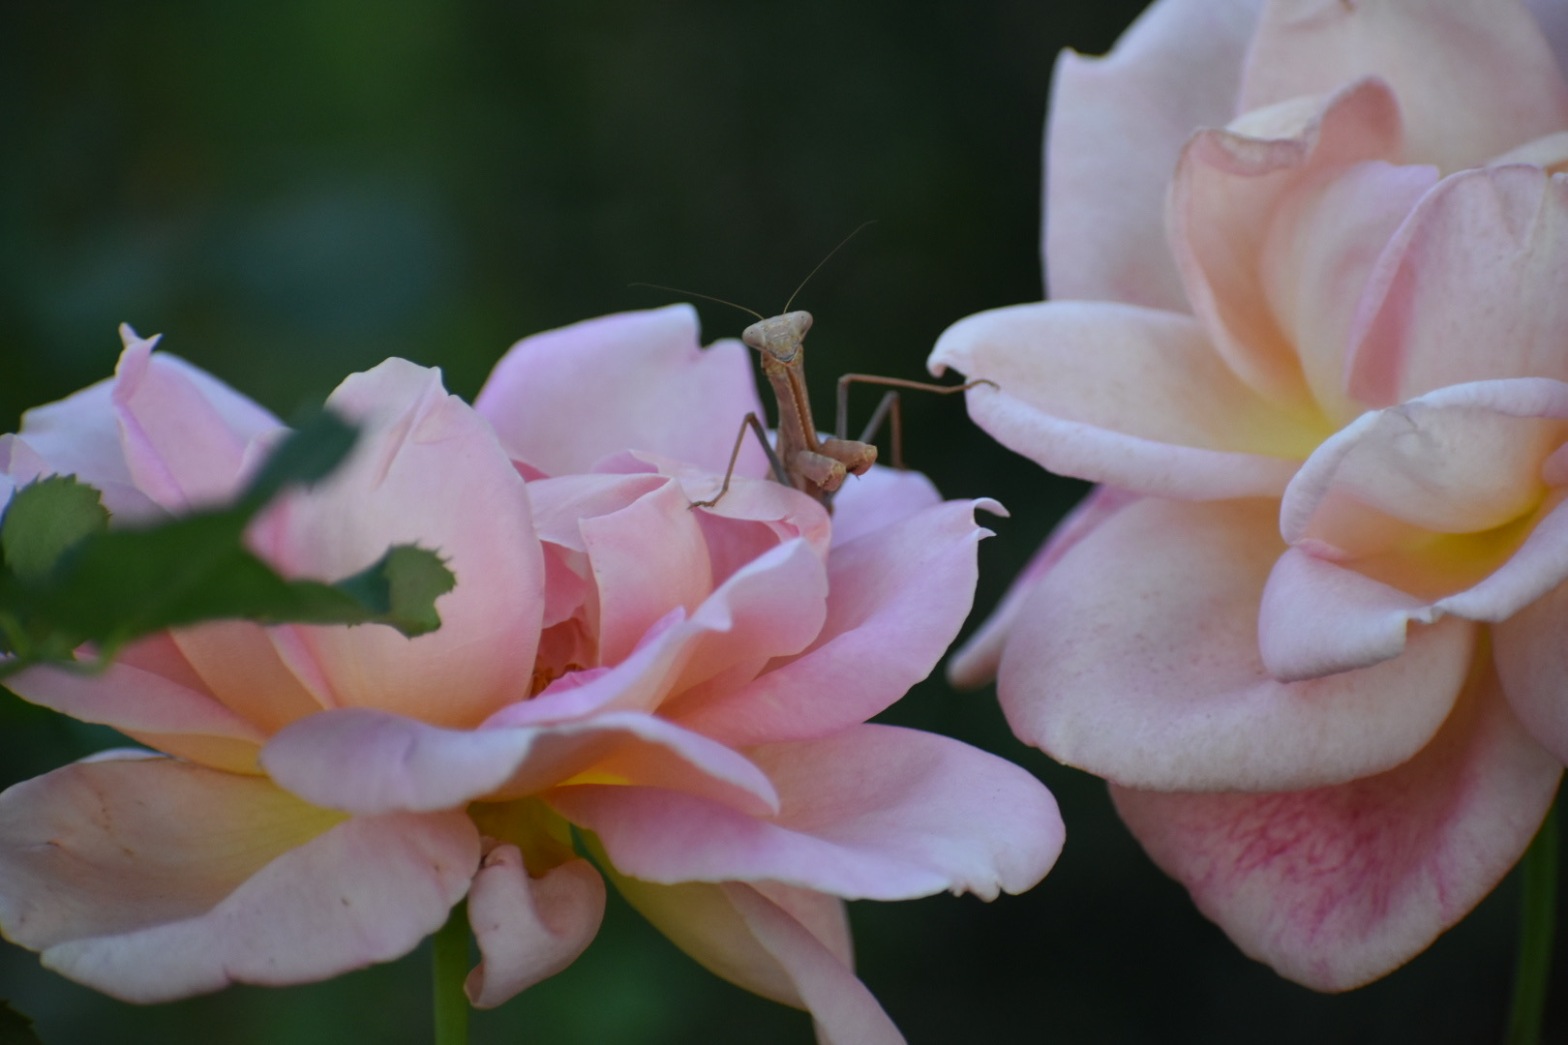 Flower of the Day: Praying Mantis in the Roses